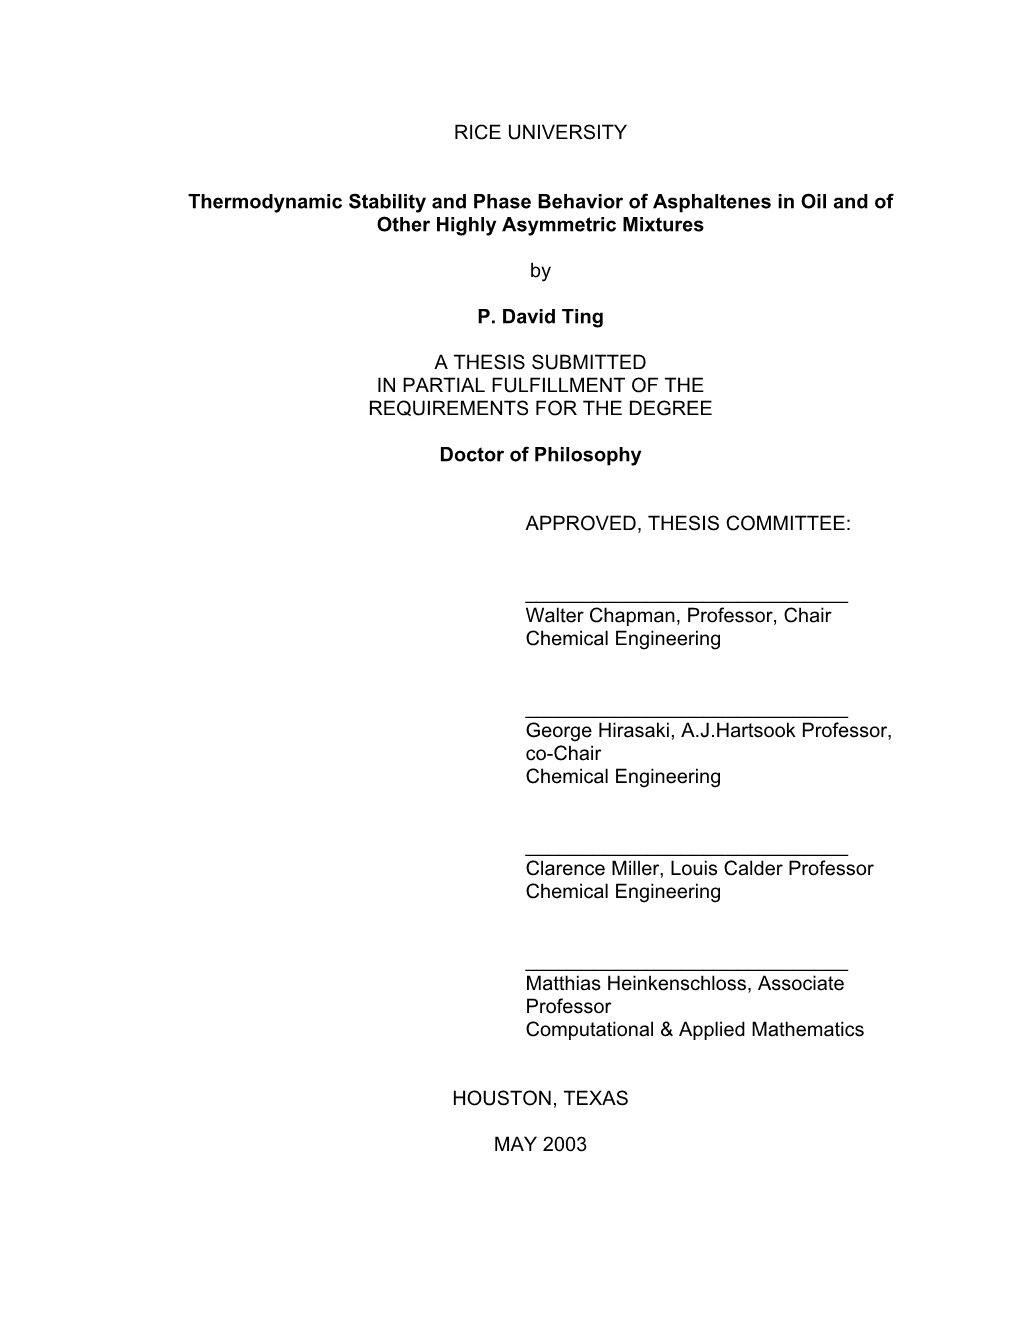 Thermodynamic Properties of Asphaltenes in Crude Oil and Of